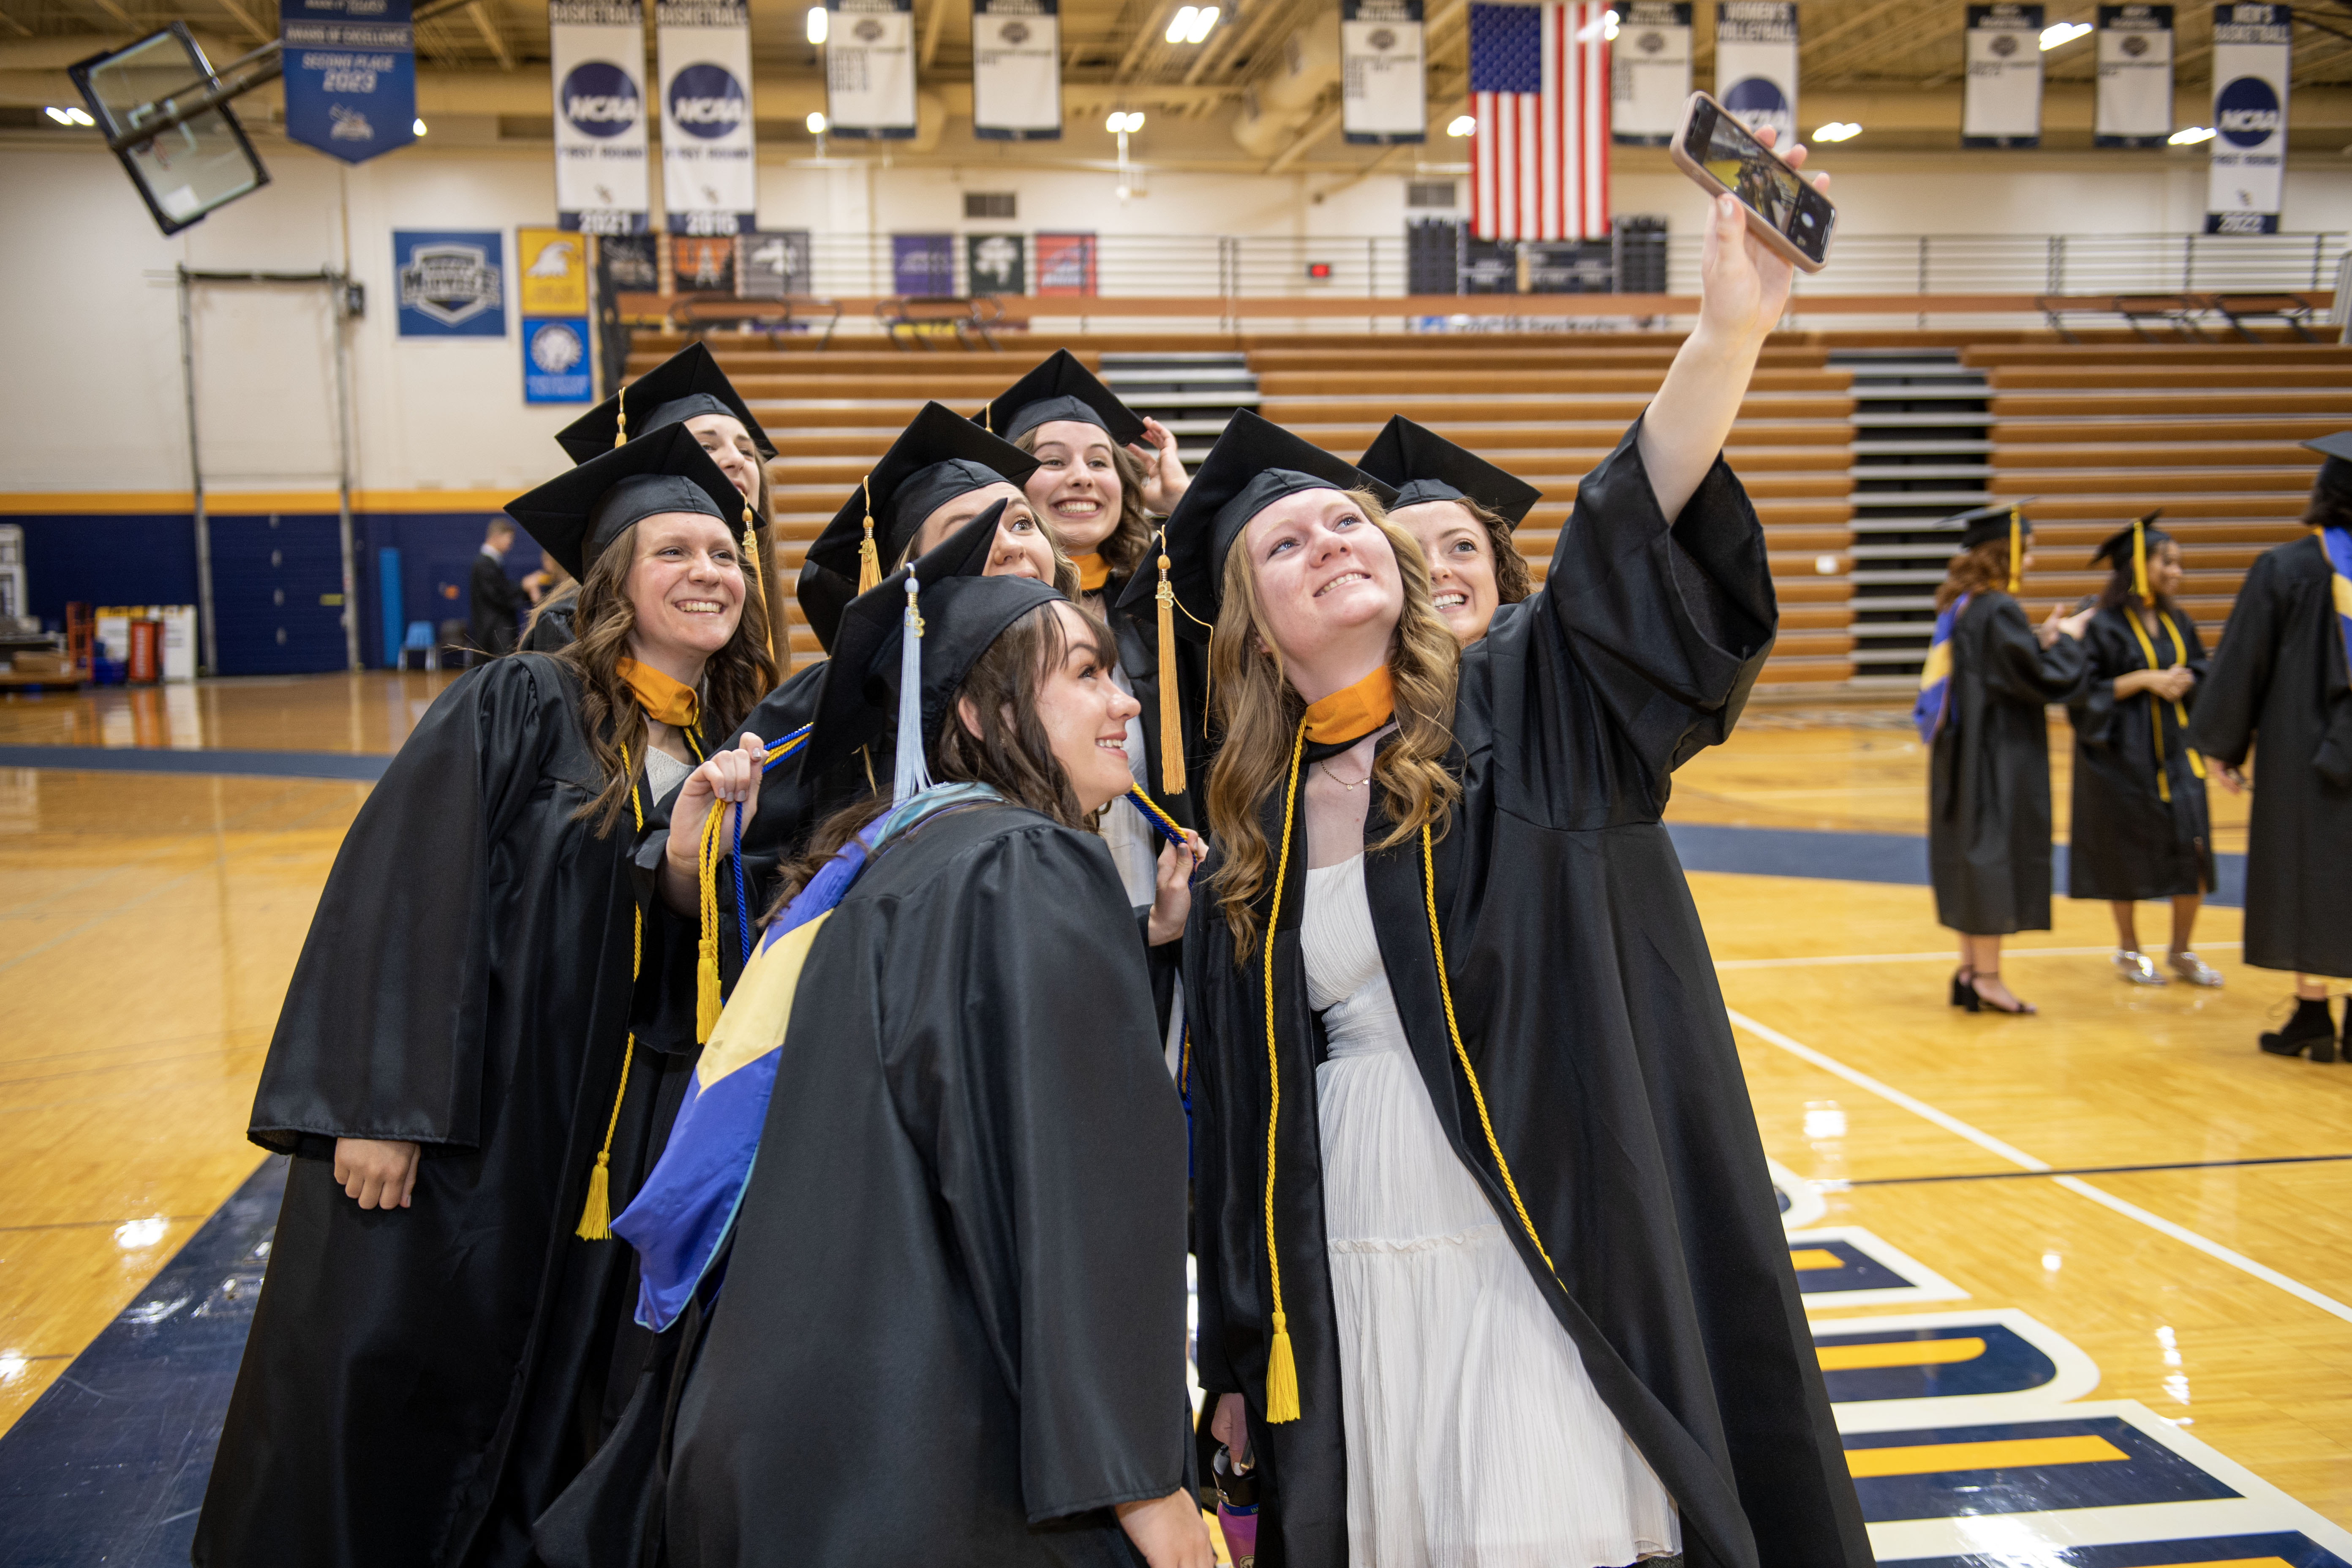 Rachel Walquist of Xenia, Ohio takes a selfie with some of her fellow graduates prior to the start of Cedarville University